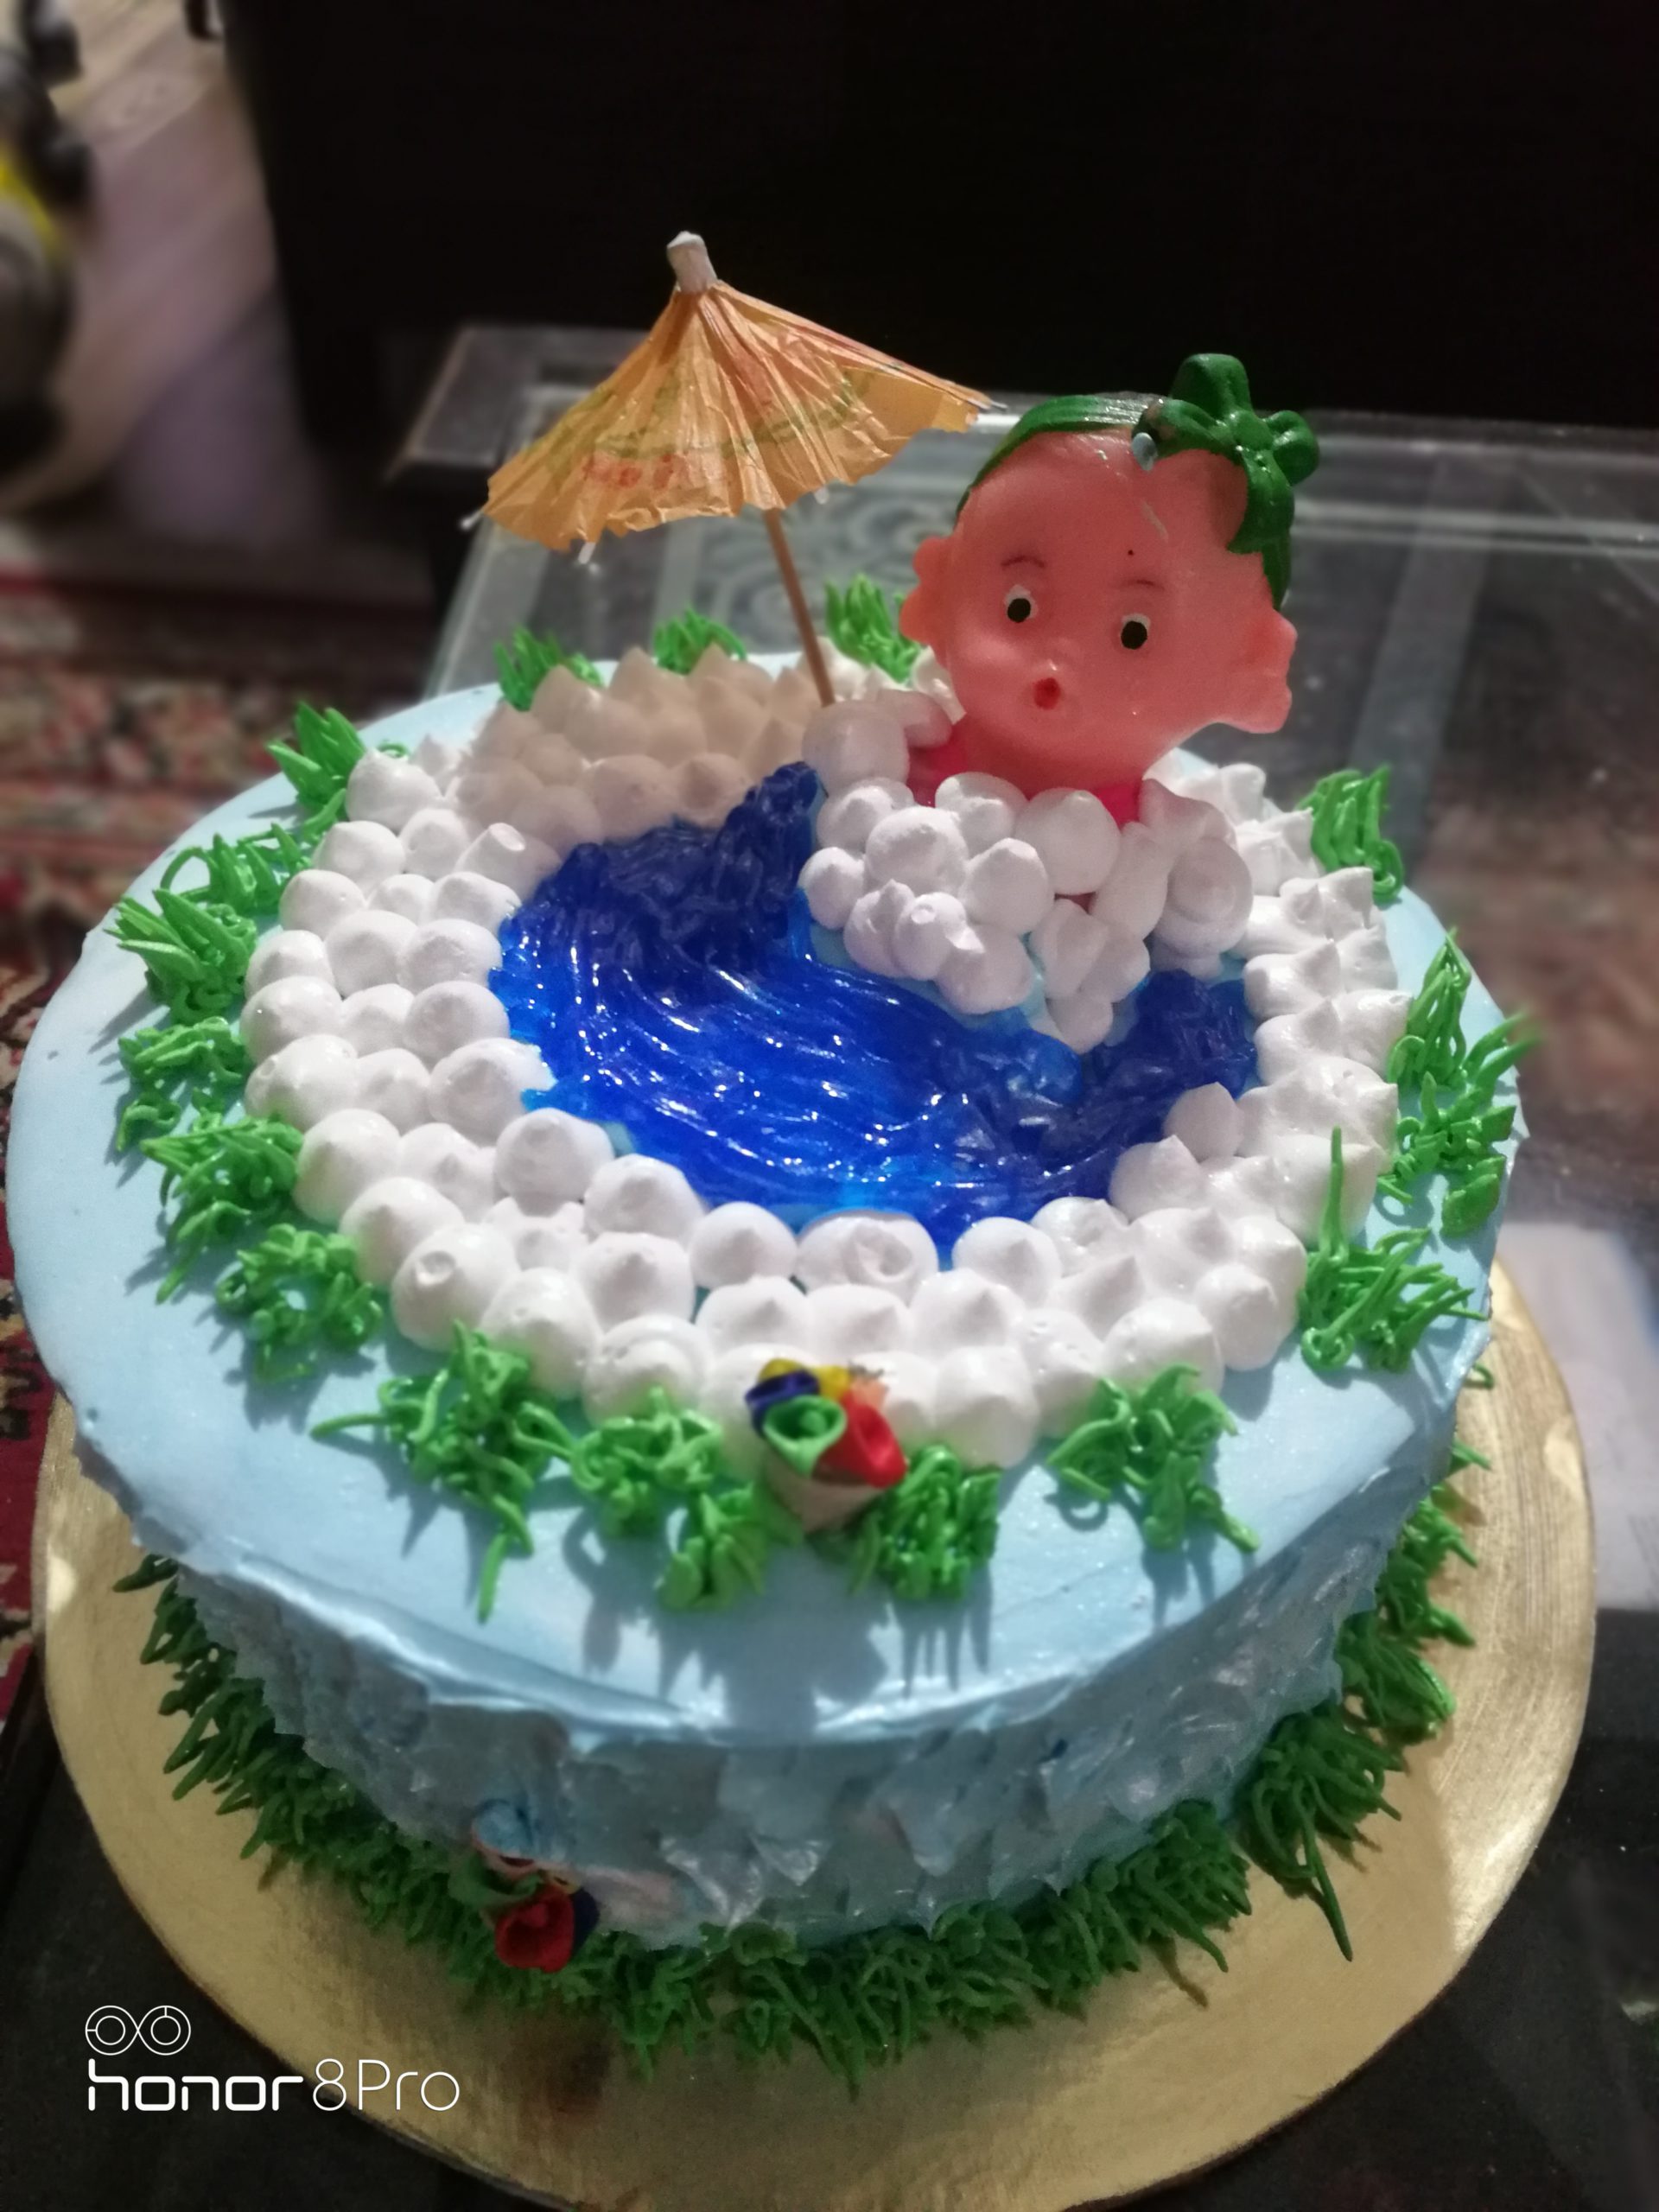 Pool Theamd Cake Designs, Images, Price Near Me